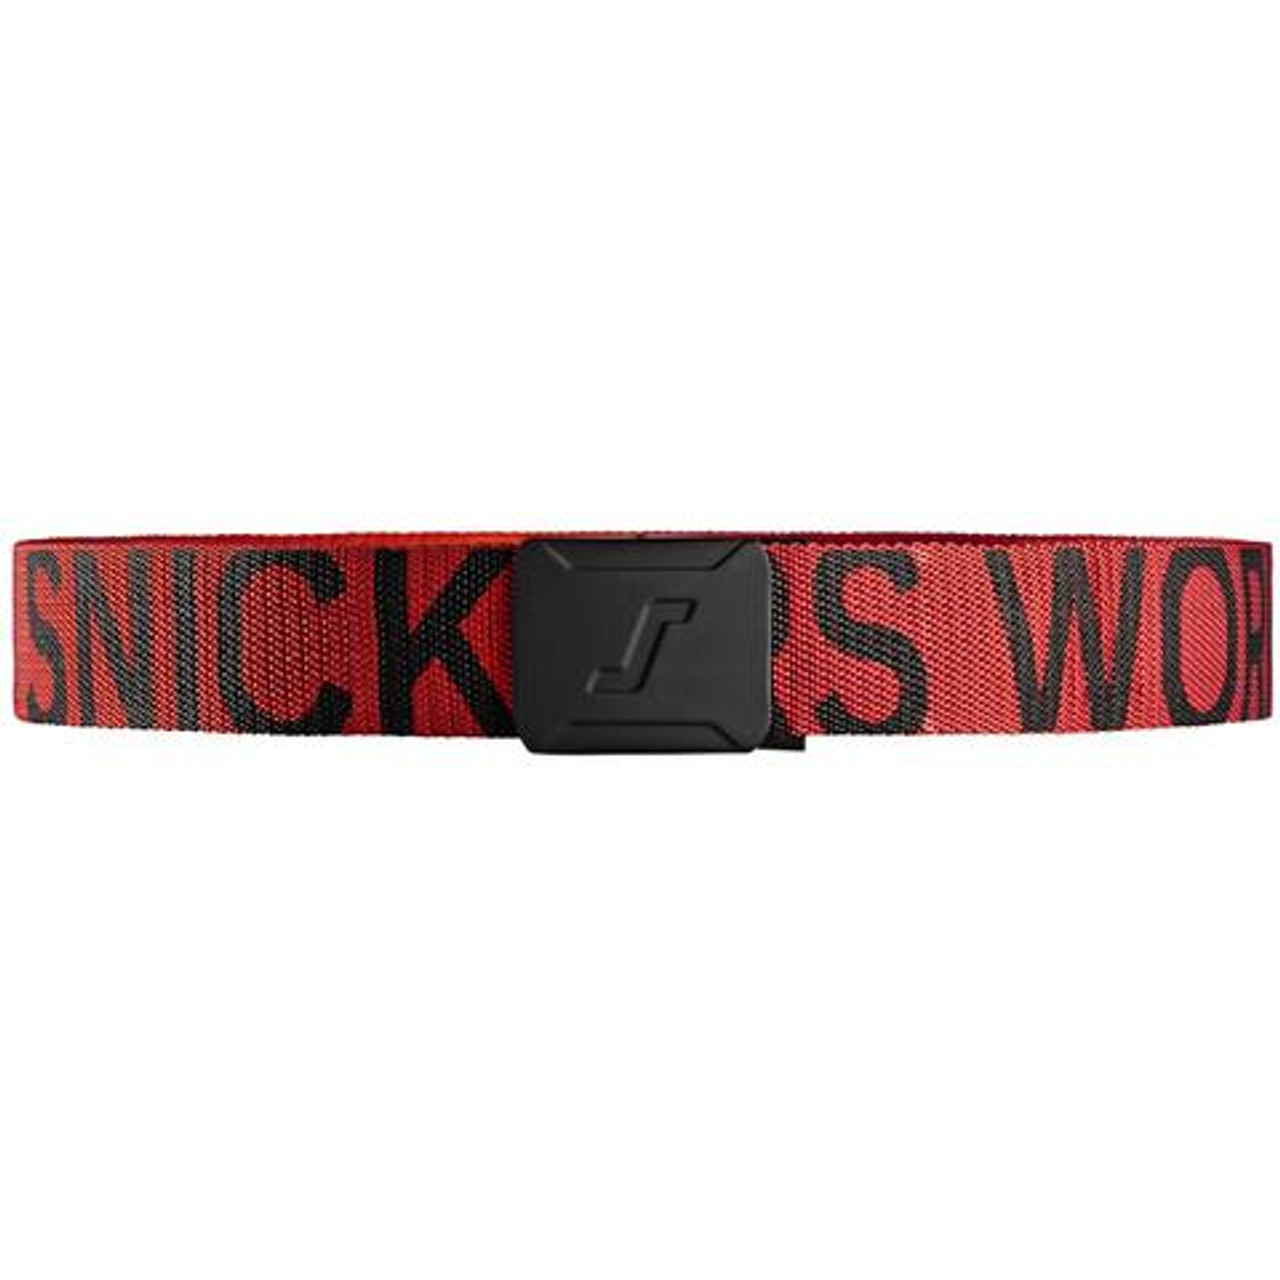 snickers workwear belt for stretchy work pants